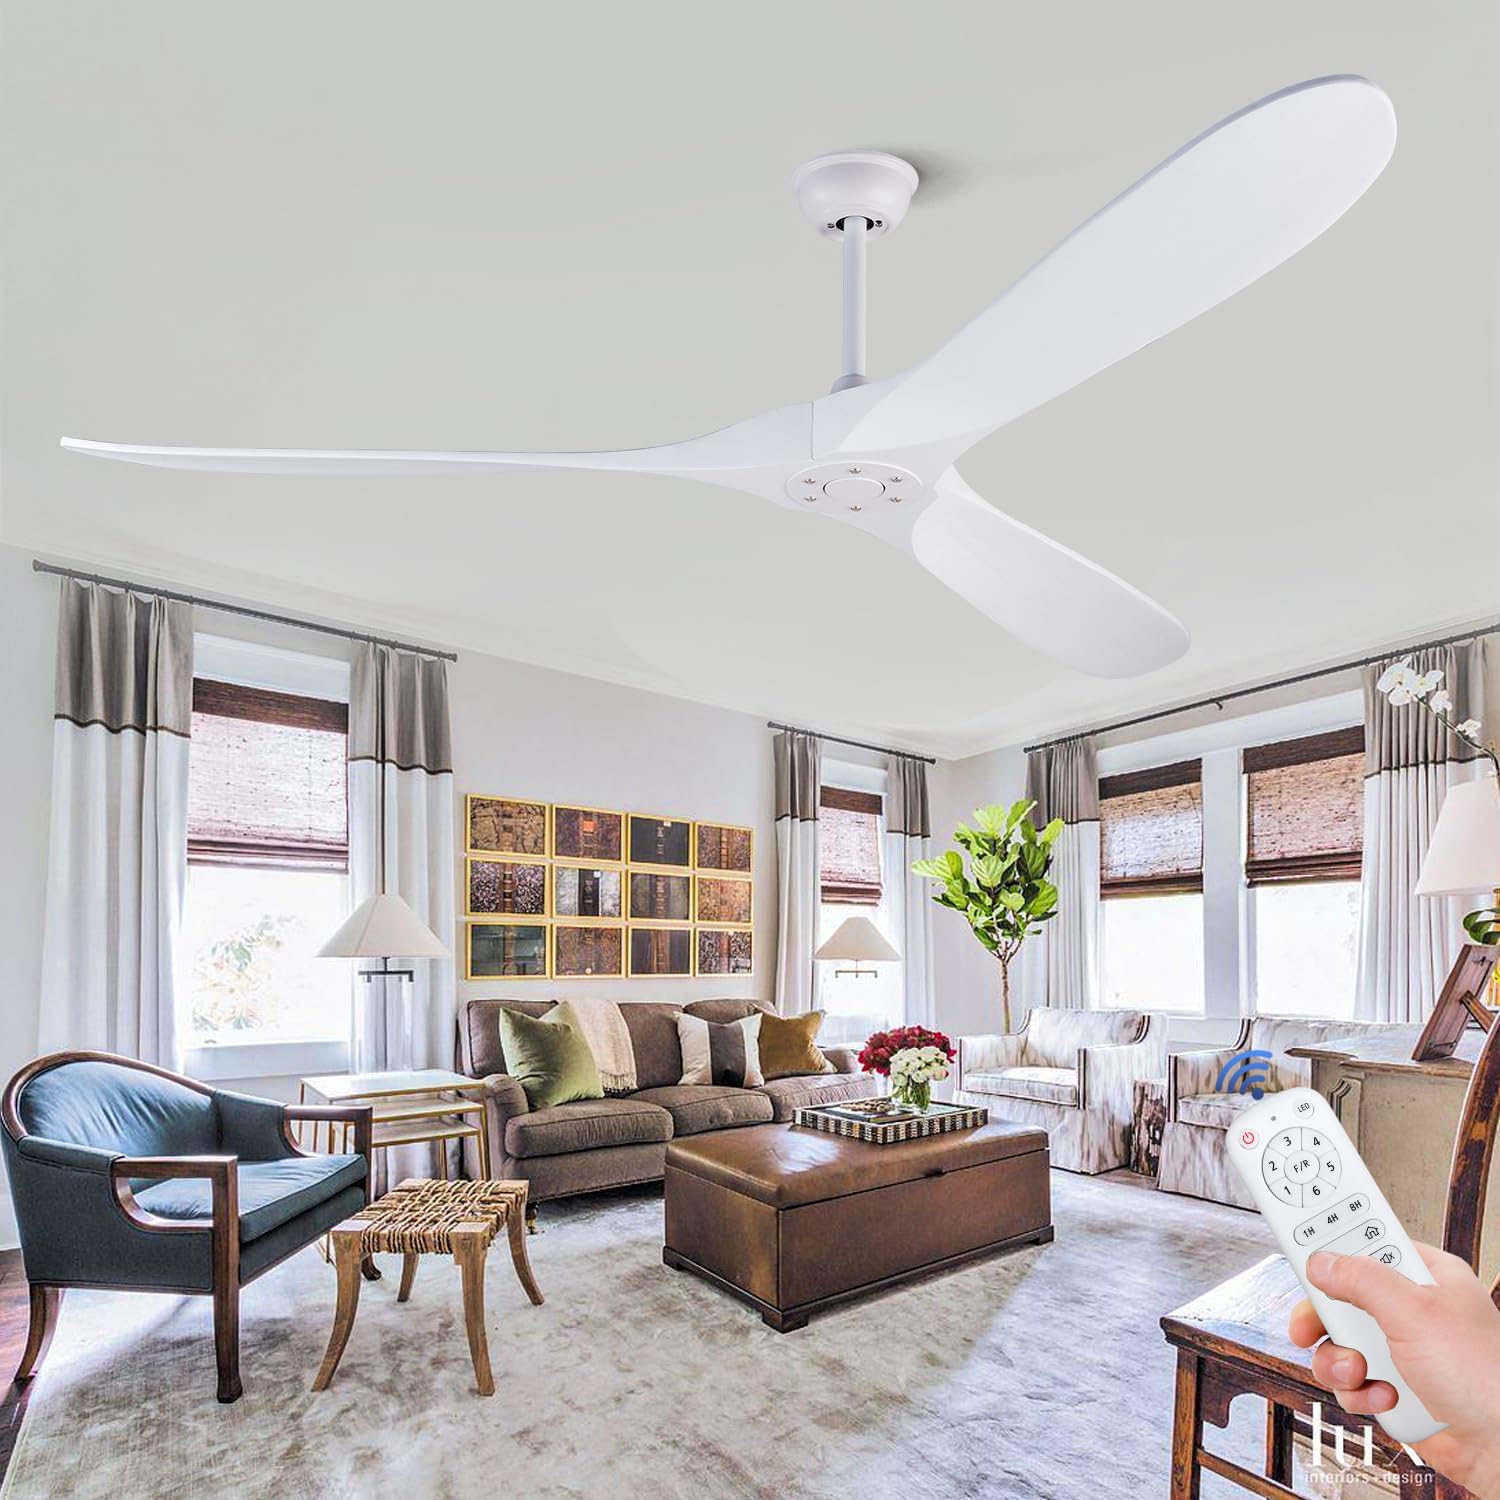 Ceiling fans without lights use less energy than traditional ceiling fans with lights, so you can save money on your energy bills.